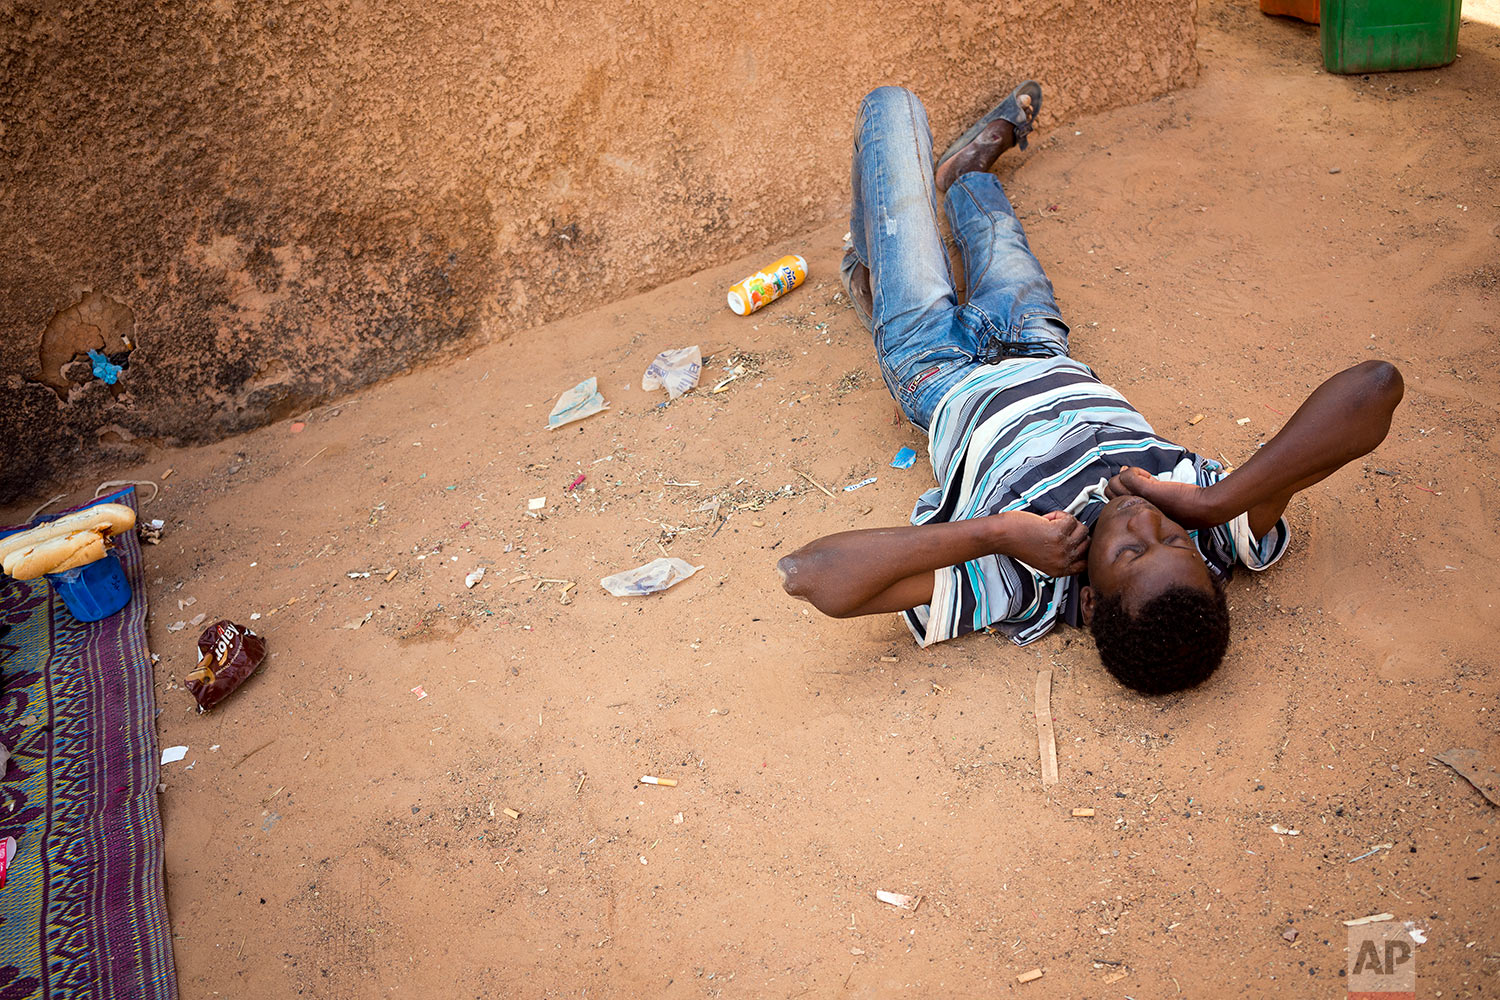  A young migrant who has been expelled from Algeria lays after being restrained by others after he attempted to strip naked in a transit center in Arlit, Niger, on June 2, 2018. (AP Photo/Jerome Delay) 